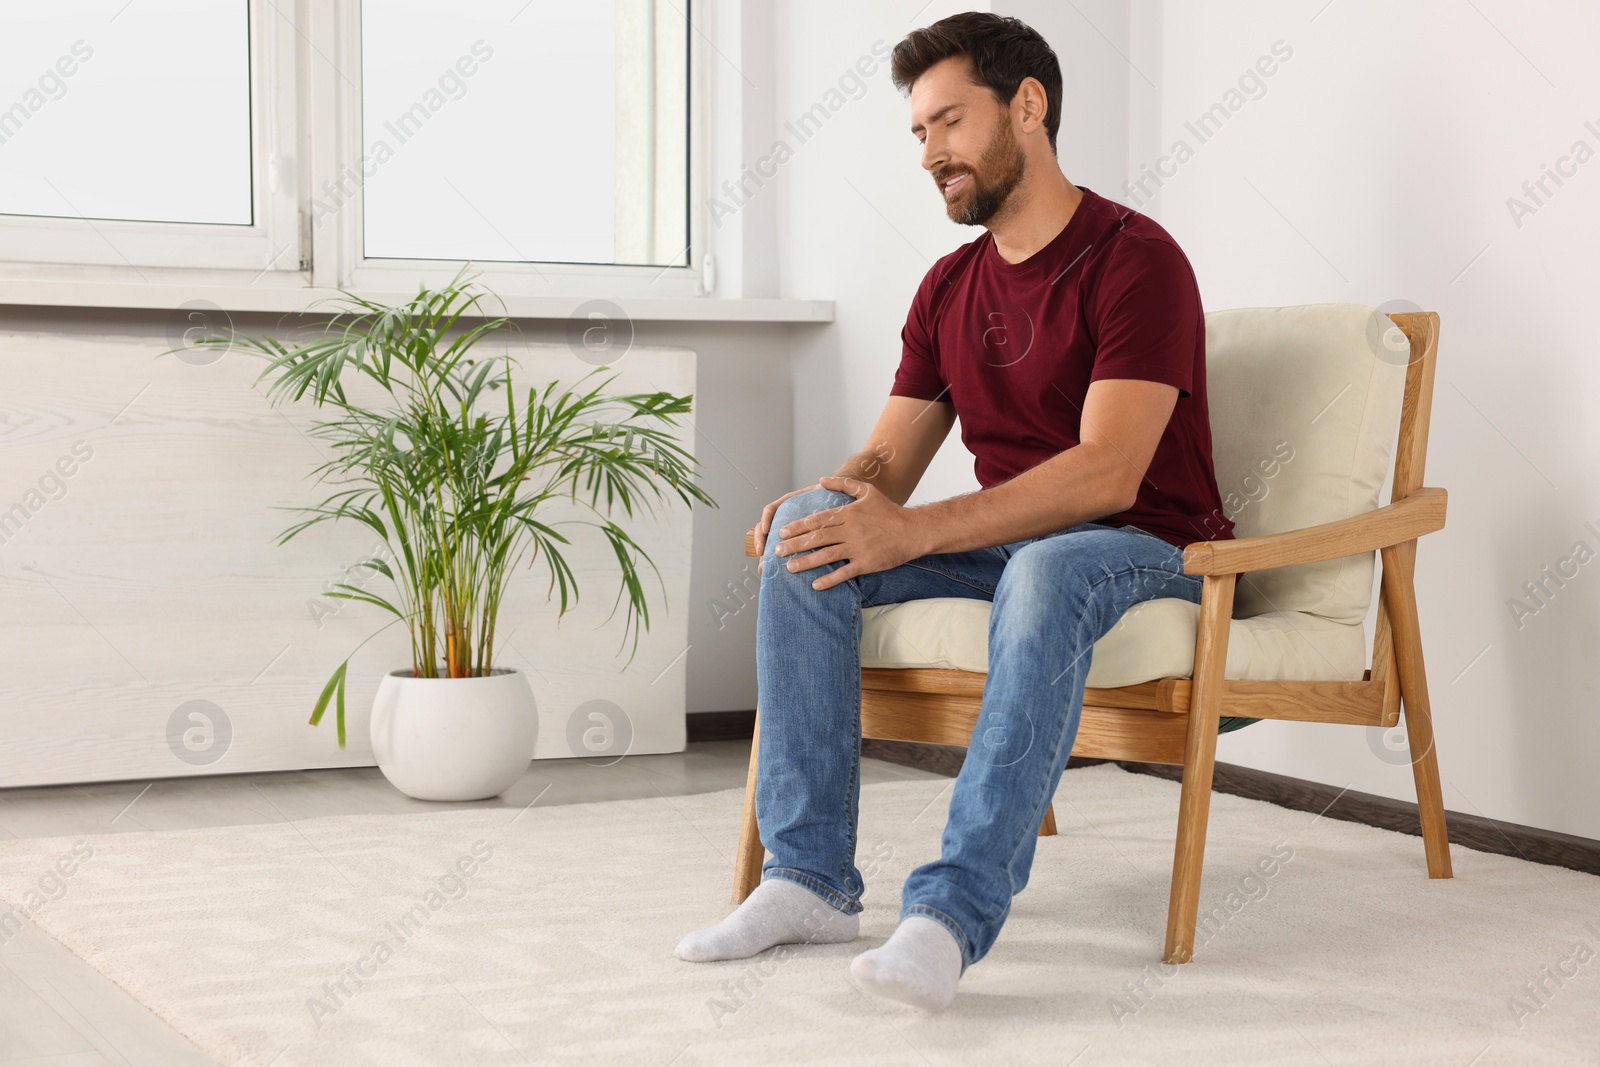 Photo of Man suffering from leg pain and touching knee on soft armchair at home